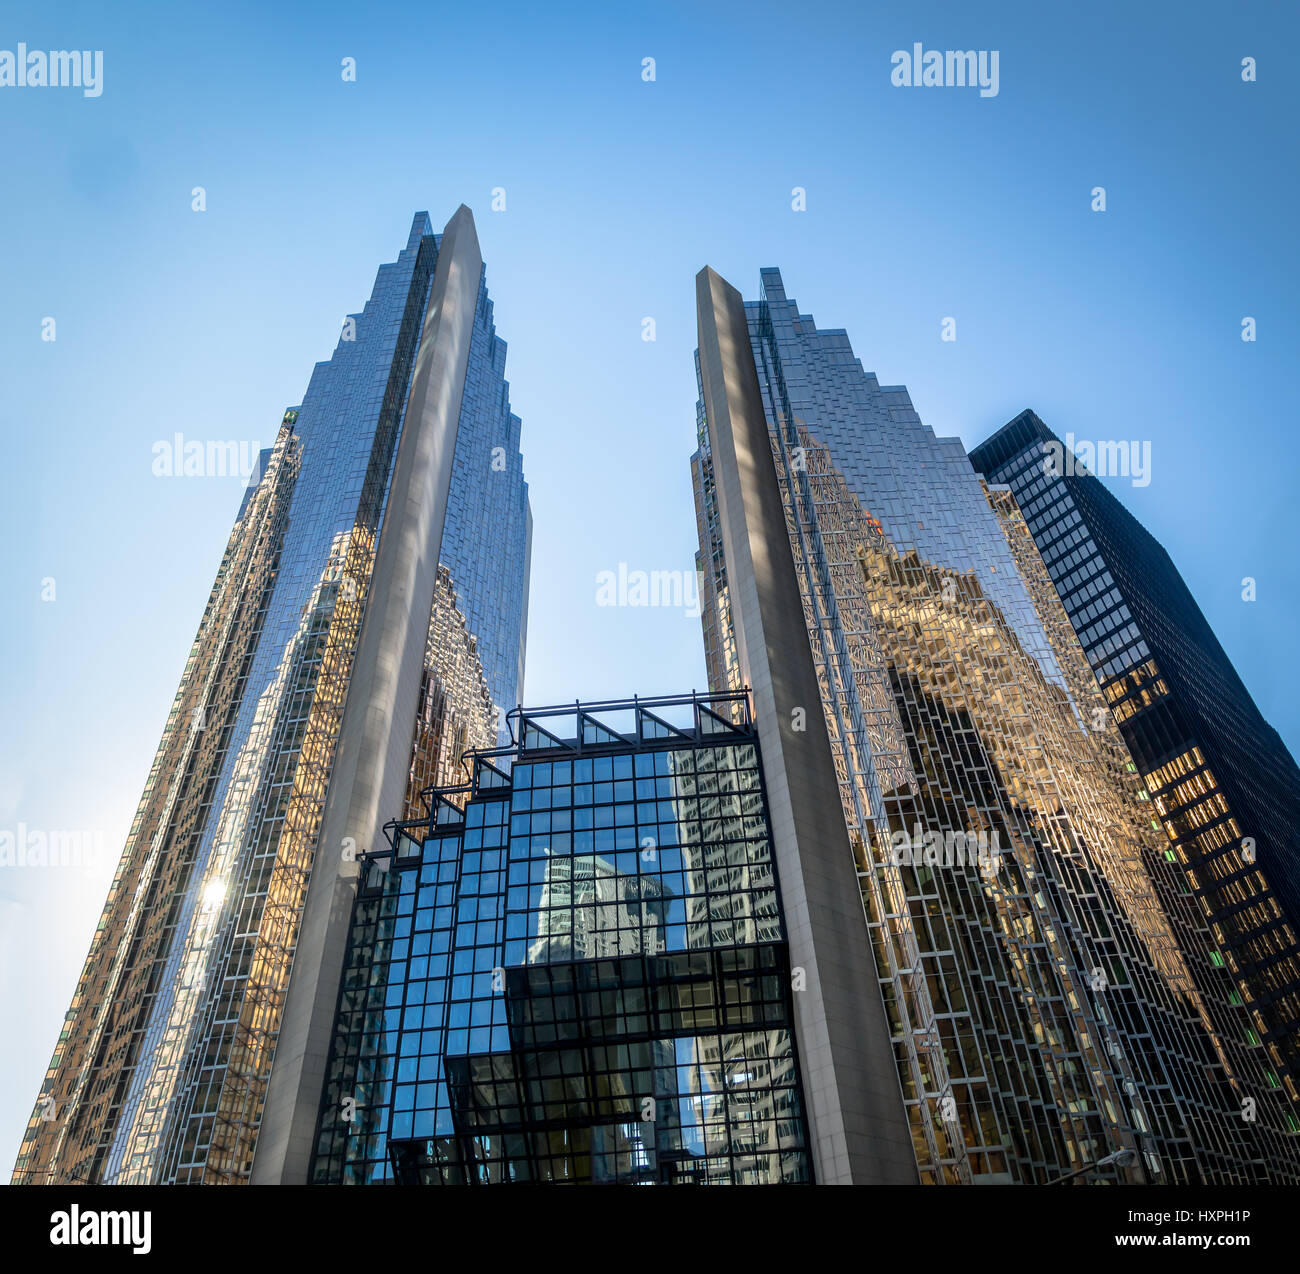 Modern skyscrapers in the Financial District of downtown Toronto - Toronto, Ontario, Canada Stock Photo